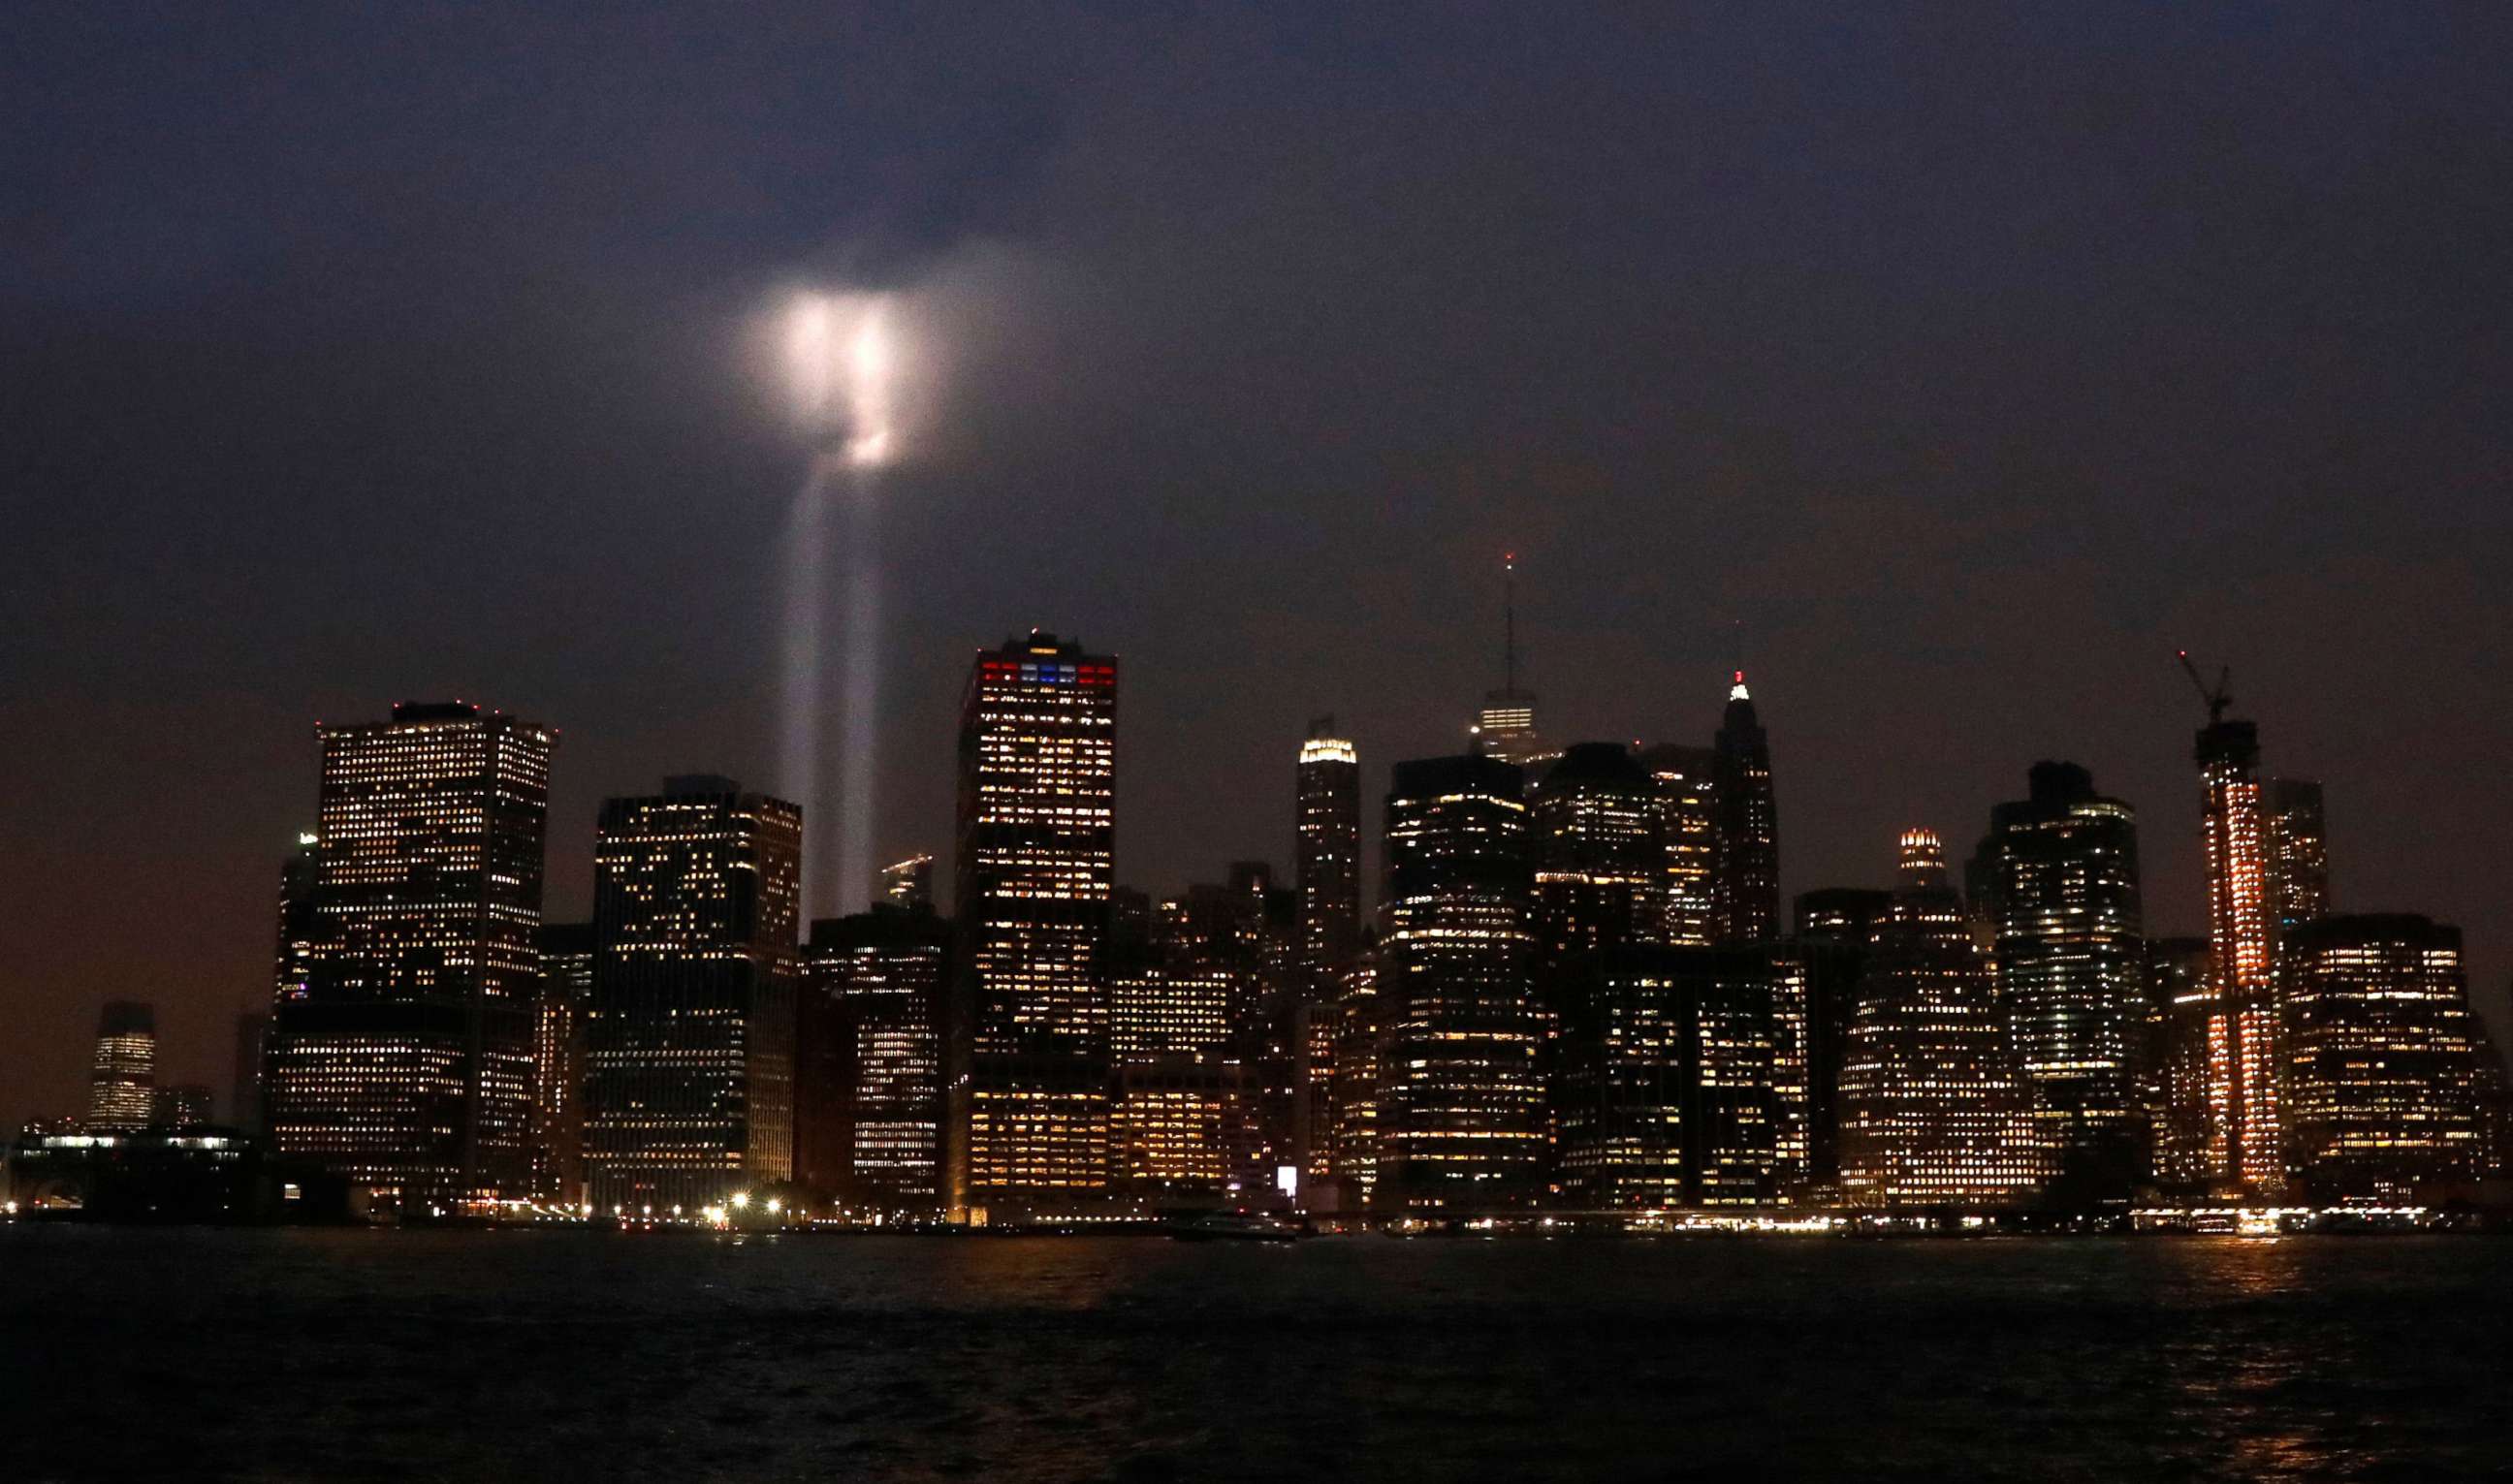 PHOTO: The Tribute in Light installation is illuminated over lower Manhattan as seen from Brooklyn, September 11, 2018.